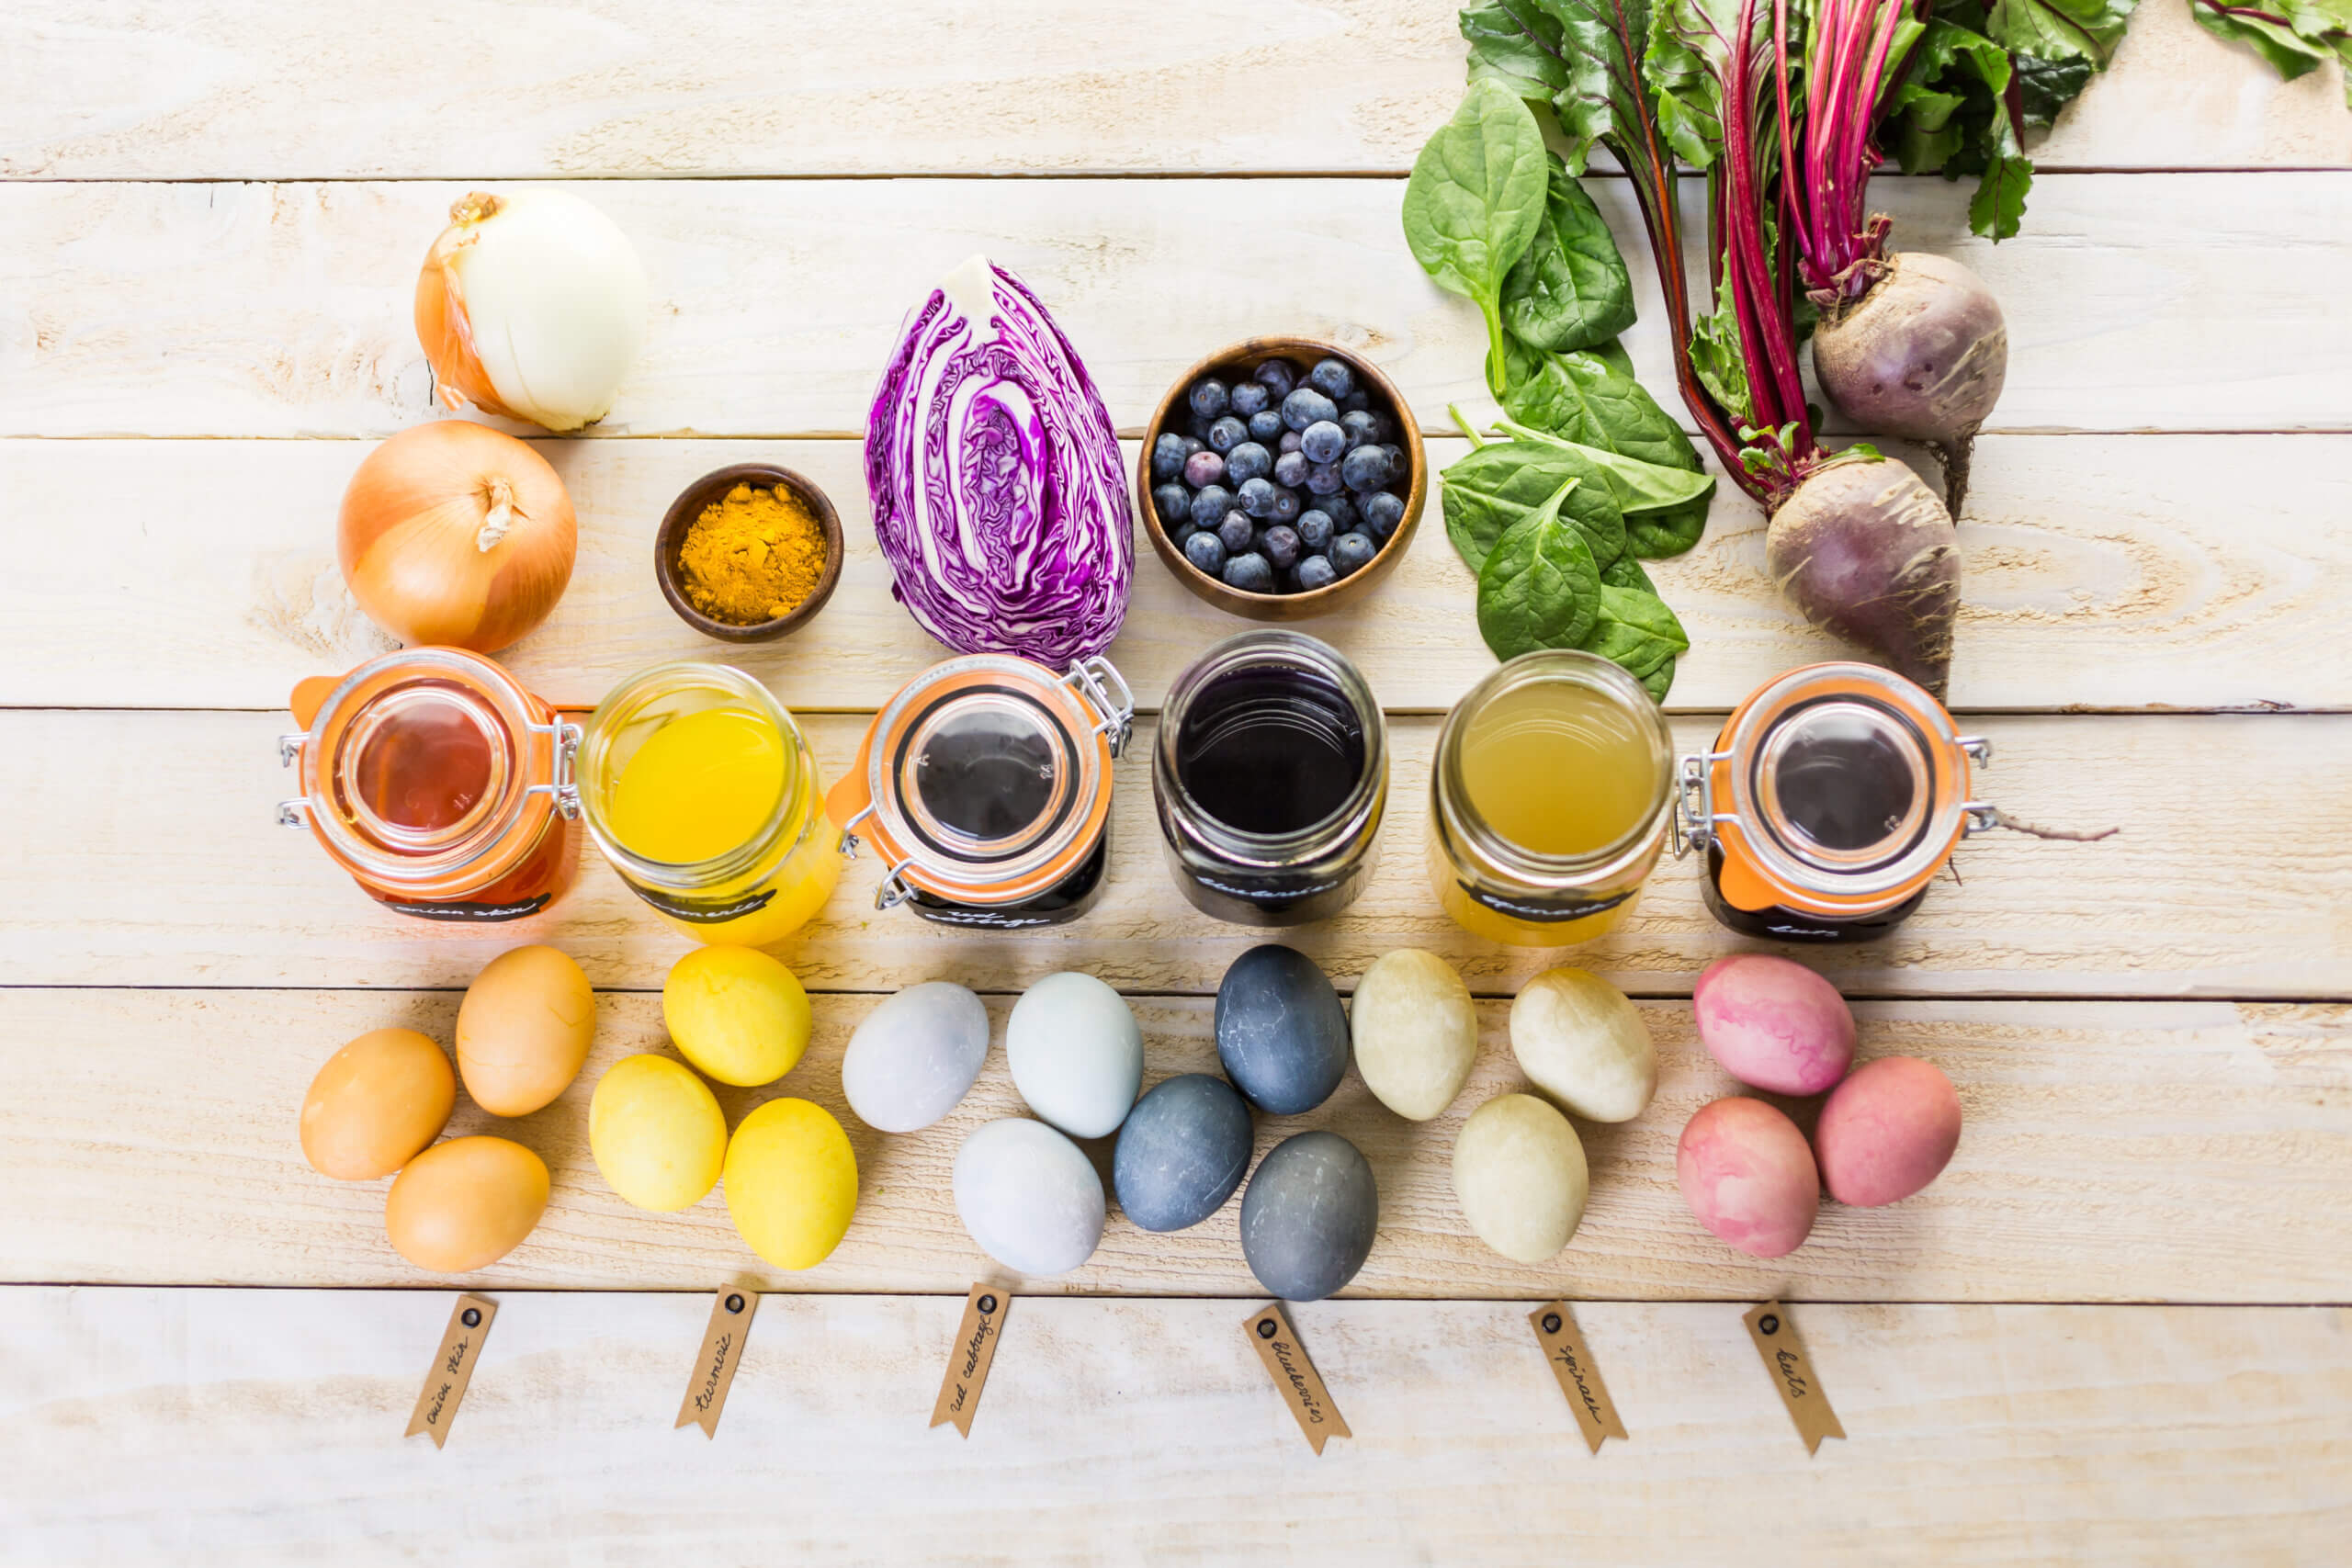 How to make natural food dyes using whole food ingredients